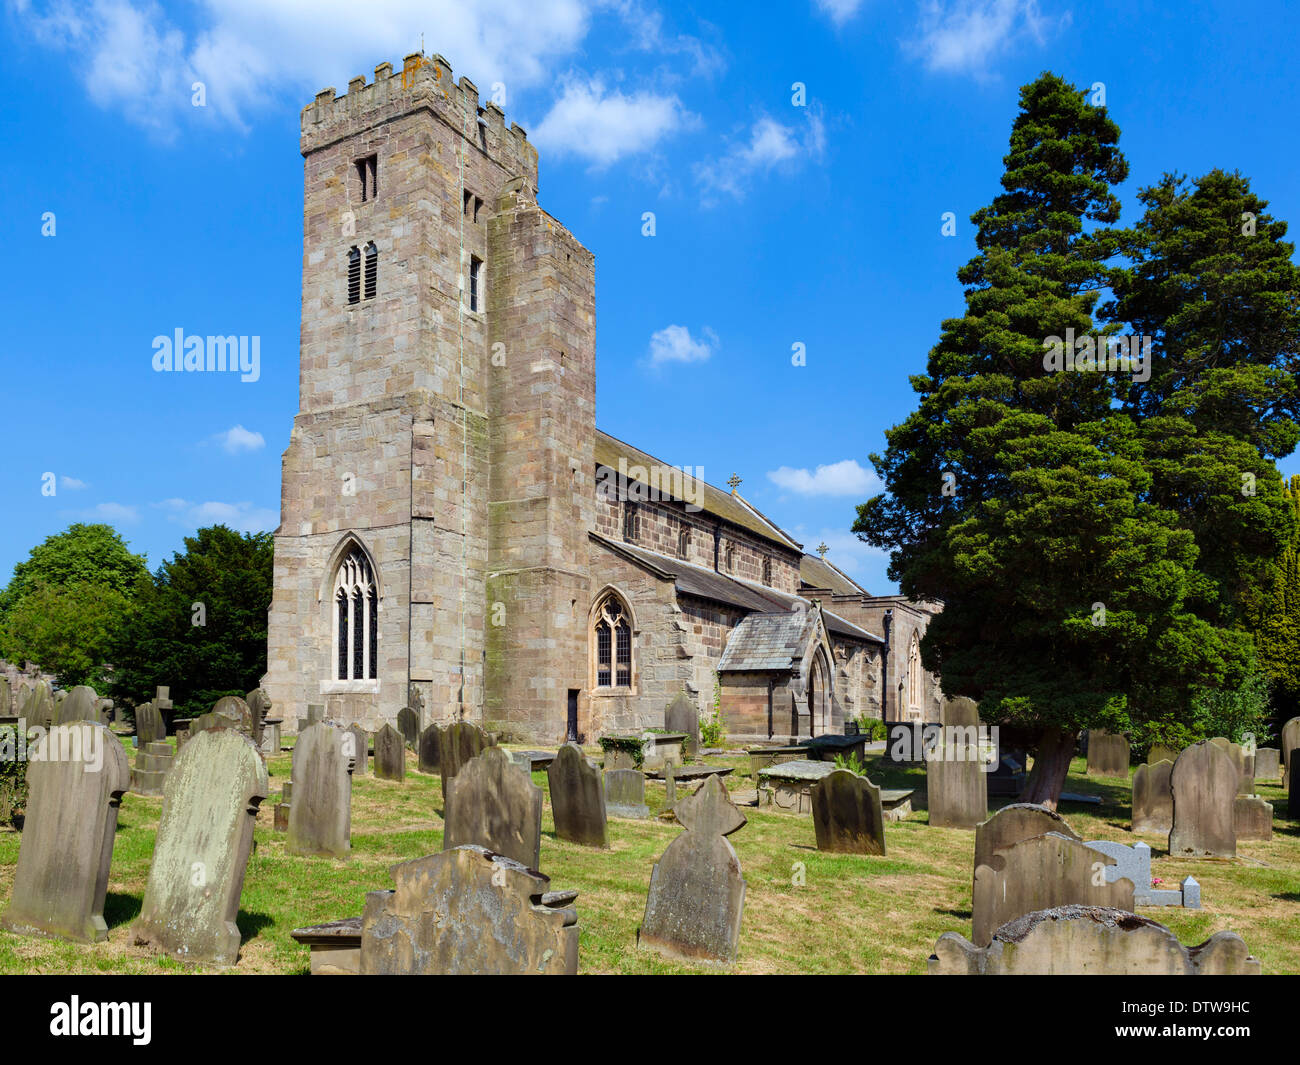 All Saints Church in the picturesque village of Ripley, North Yorkshire, England, UK Stock Photo